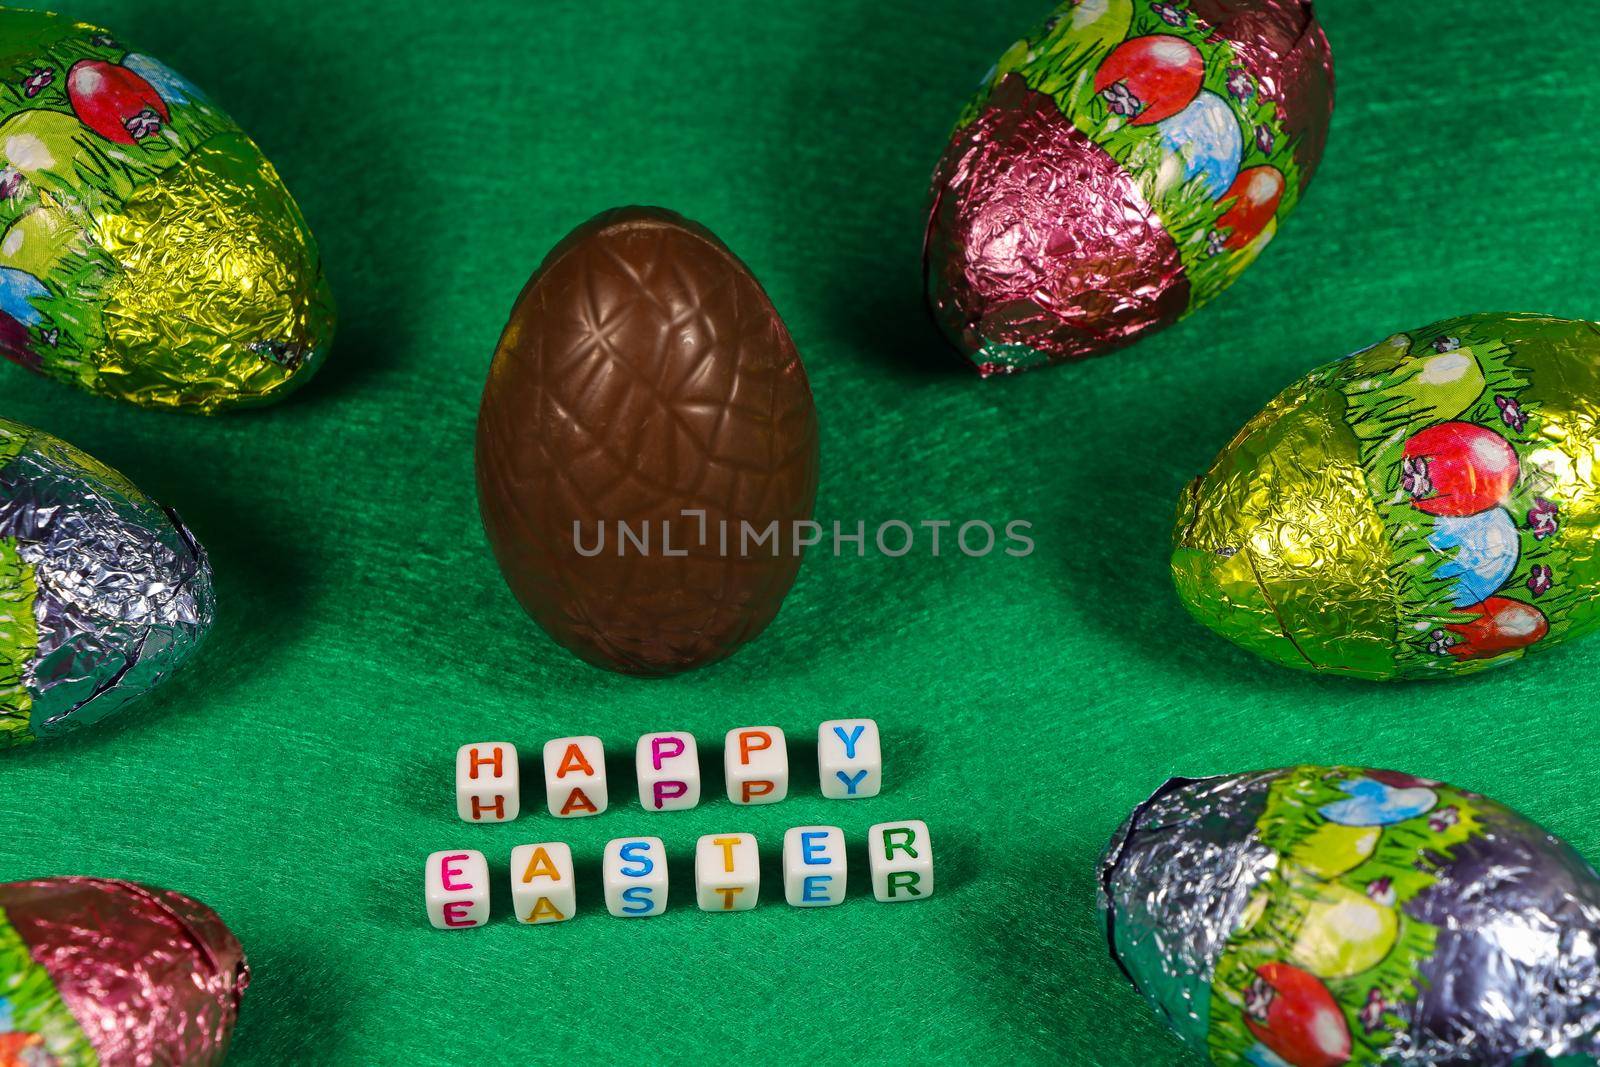 Happy Easter Chocolate Egg And Colorful Wrapped Eggs by jjvanginkel